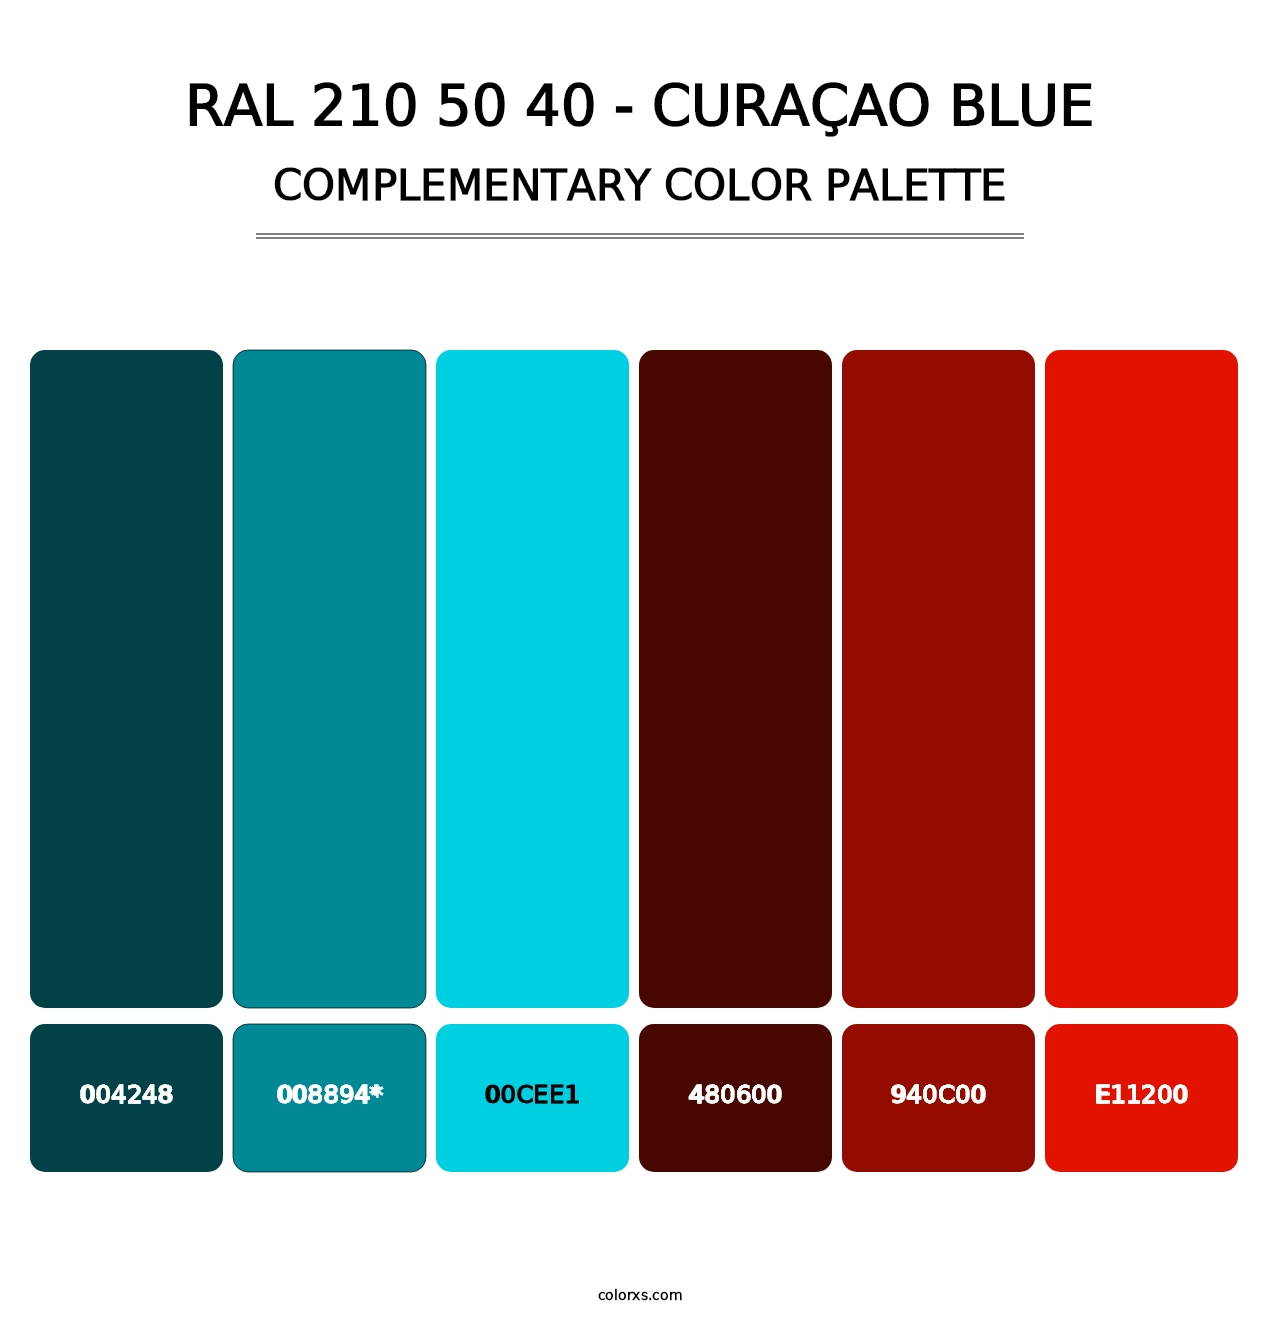 RAL 210 50 40 - Curaçao Blue - Complementary Color Palette